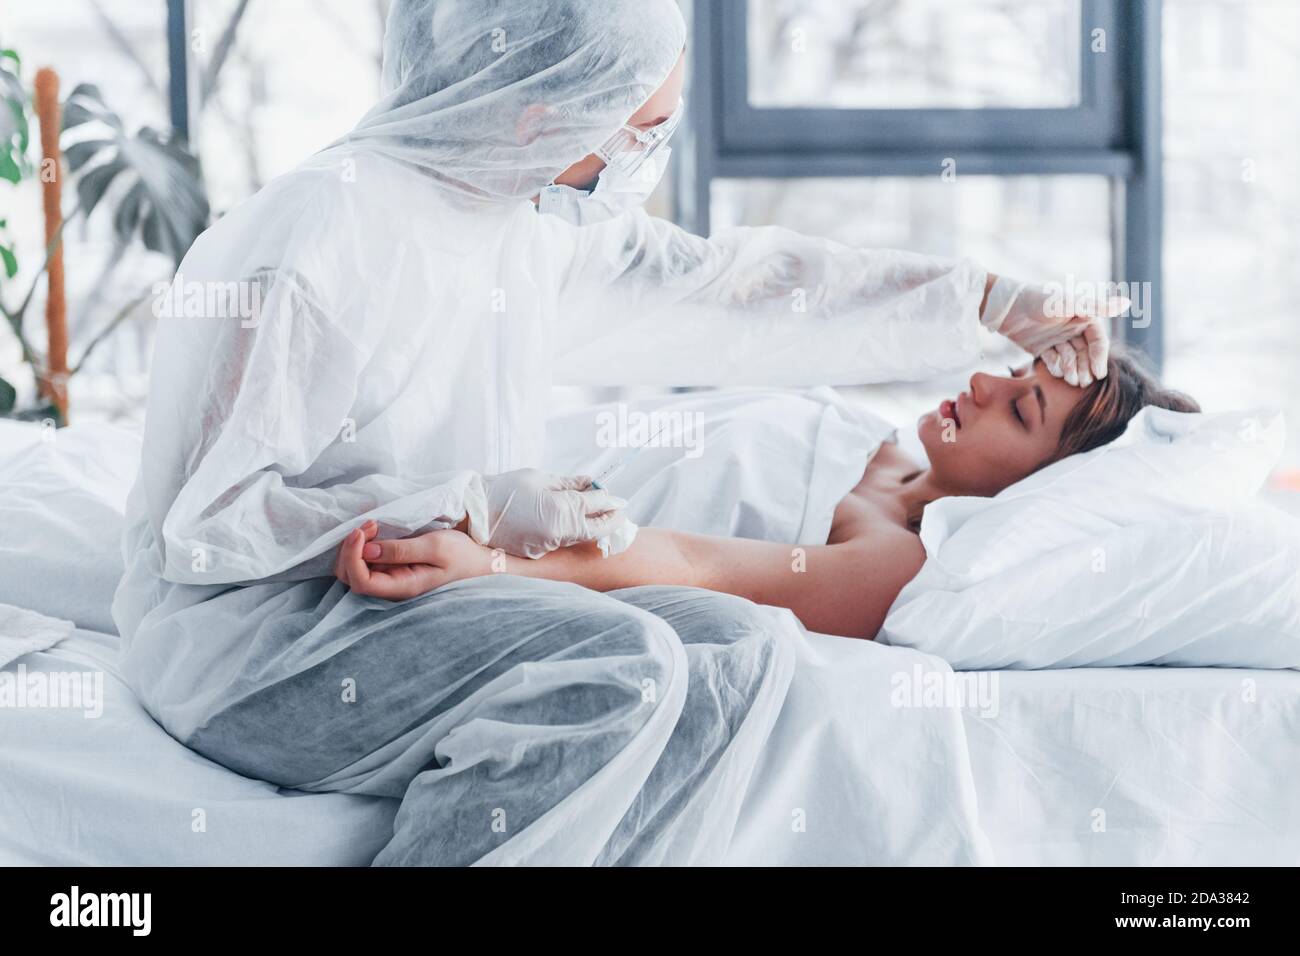 Checks temperature. Female doctor in defensive lab coat and protective eyewear with syringe in hand injecting medicine to young girl sick of virus Stock Photo